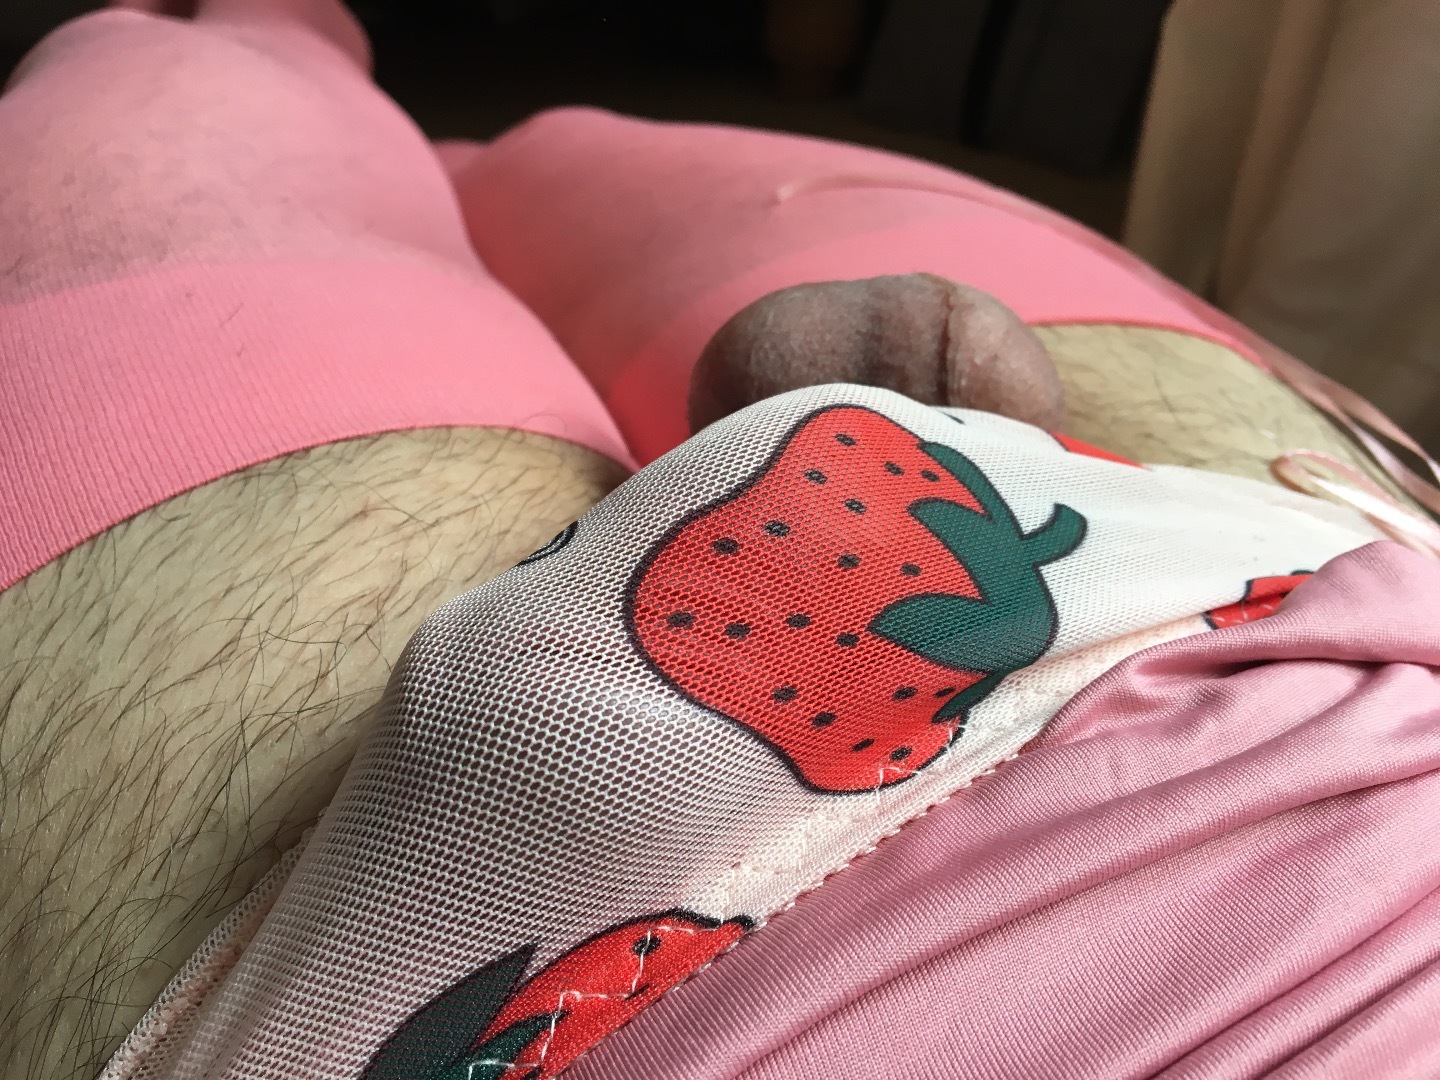 showing images for vanna white anal porn xxx #NewPanties #strawberries #fruit #StrawberryPanties #NewStrawberryPanties #MyNewPanties